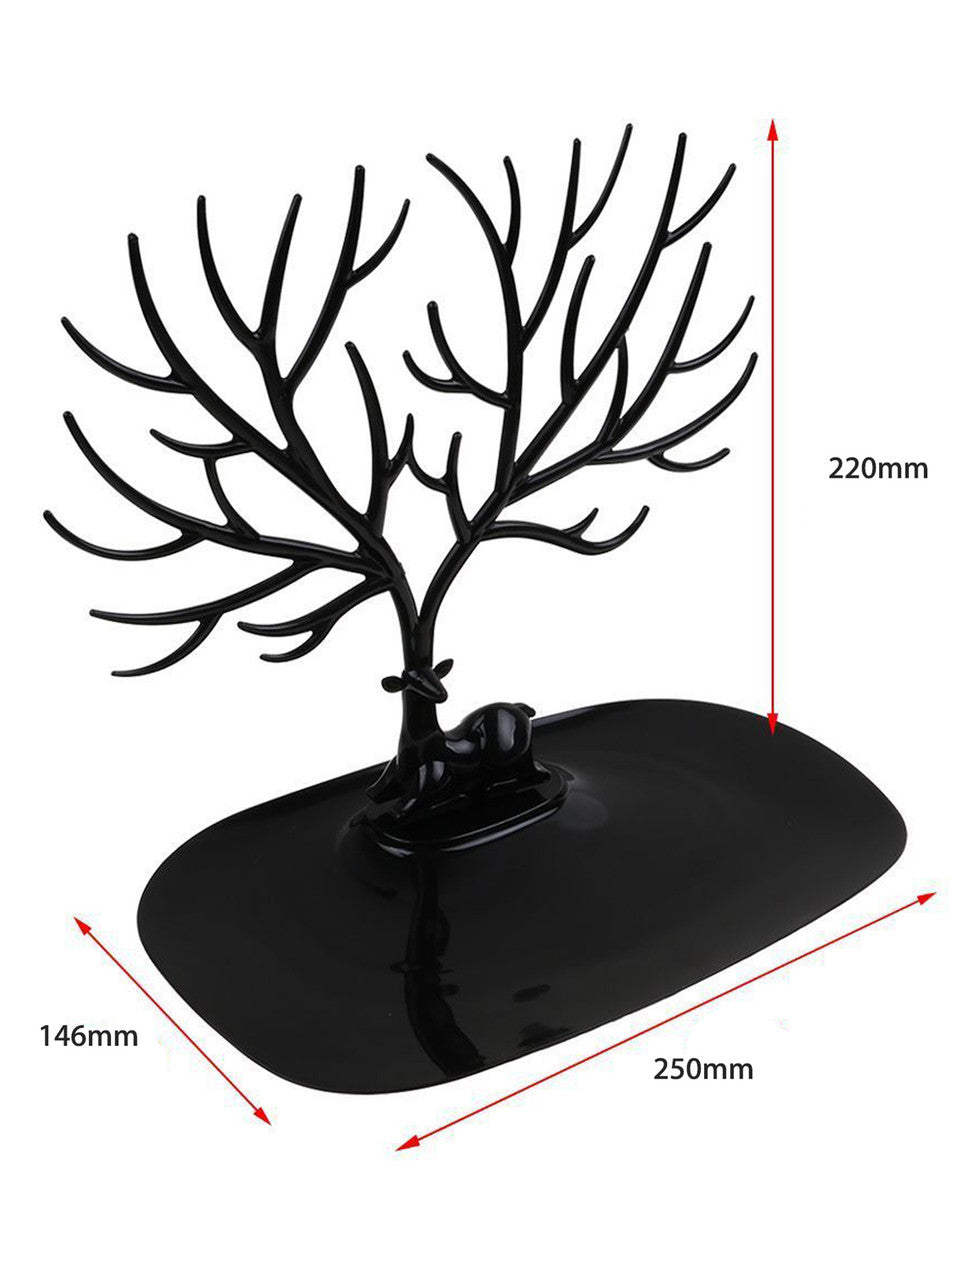 Jewelry Deer Tree Stand Display Organizer Necklace Ring Earring Holder Show Rack - Necklace Earring Bracelet Holder Necklace Jewelry Organizer Tree Hooks Rack Stand Ring Dish Tray-Black